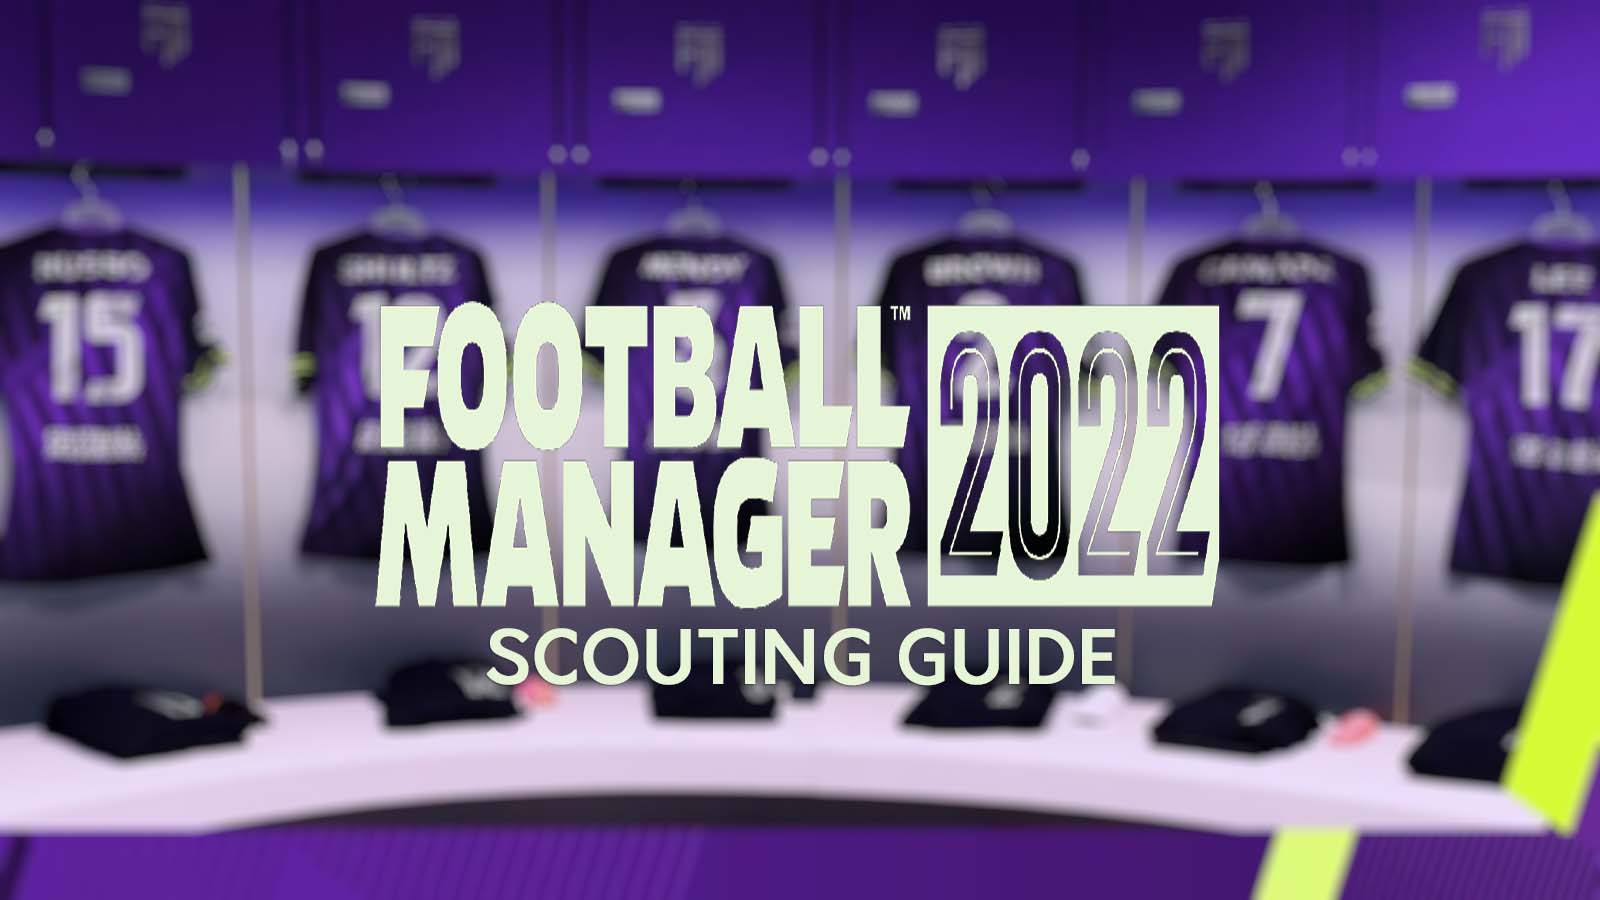 How to make Football Manager 2022 more realistic